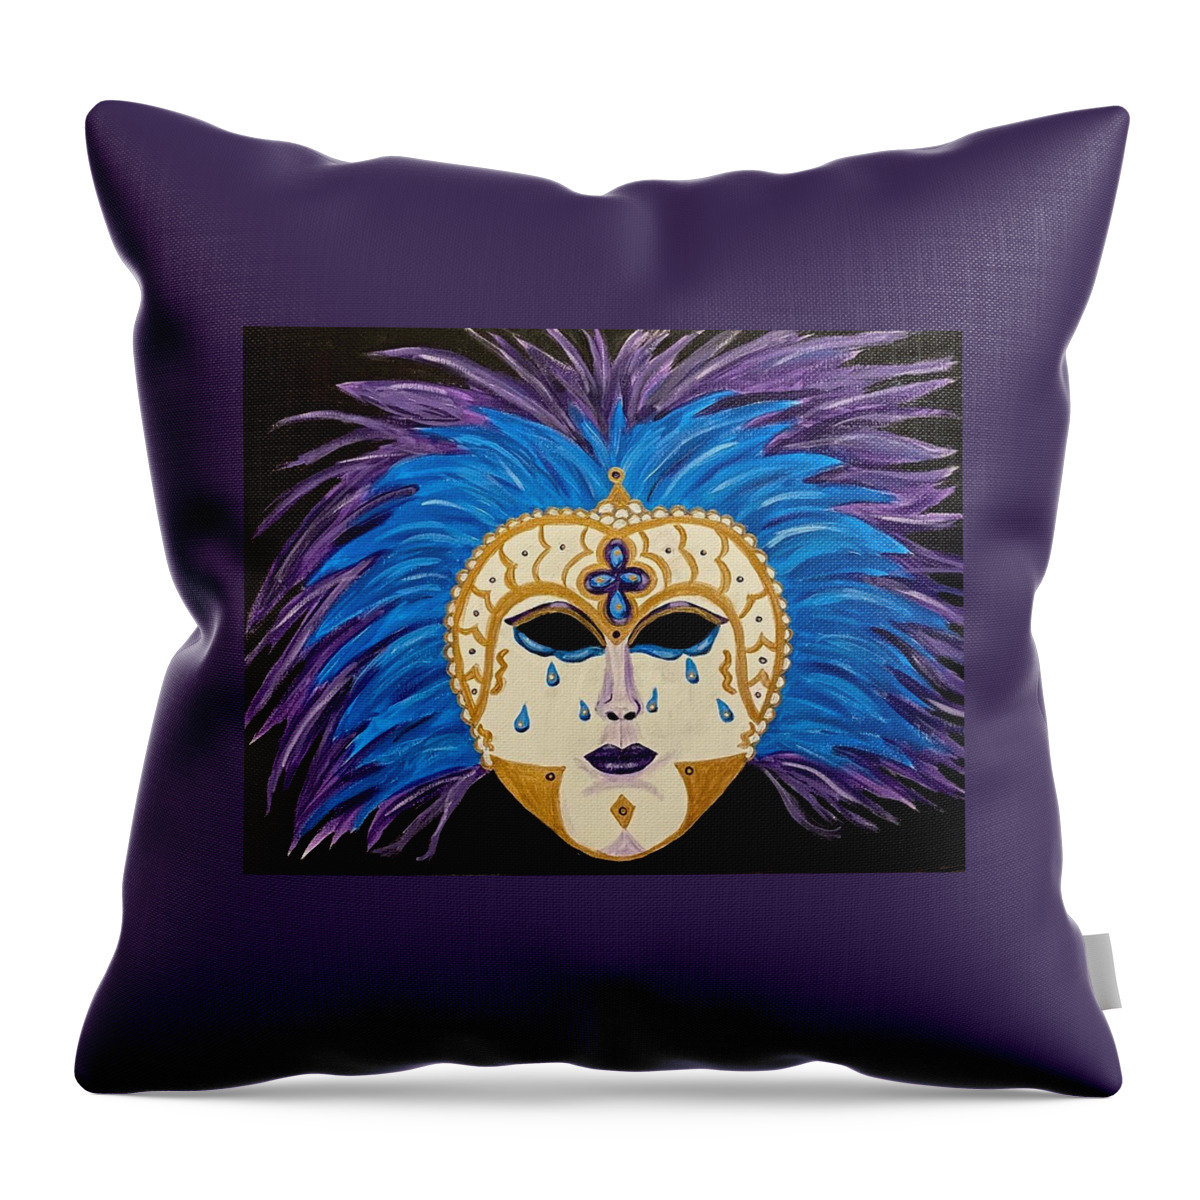 Masquerade Throw Pillow featuring the painting Bad Hair Day Masquerade by Nancy Sisco